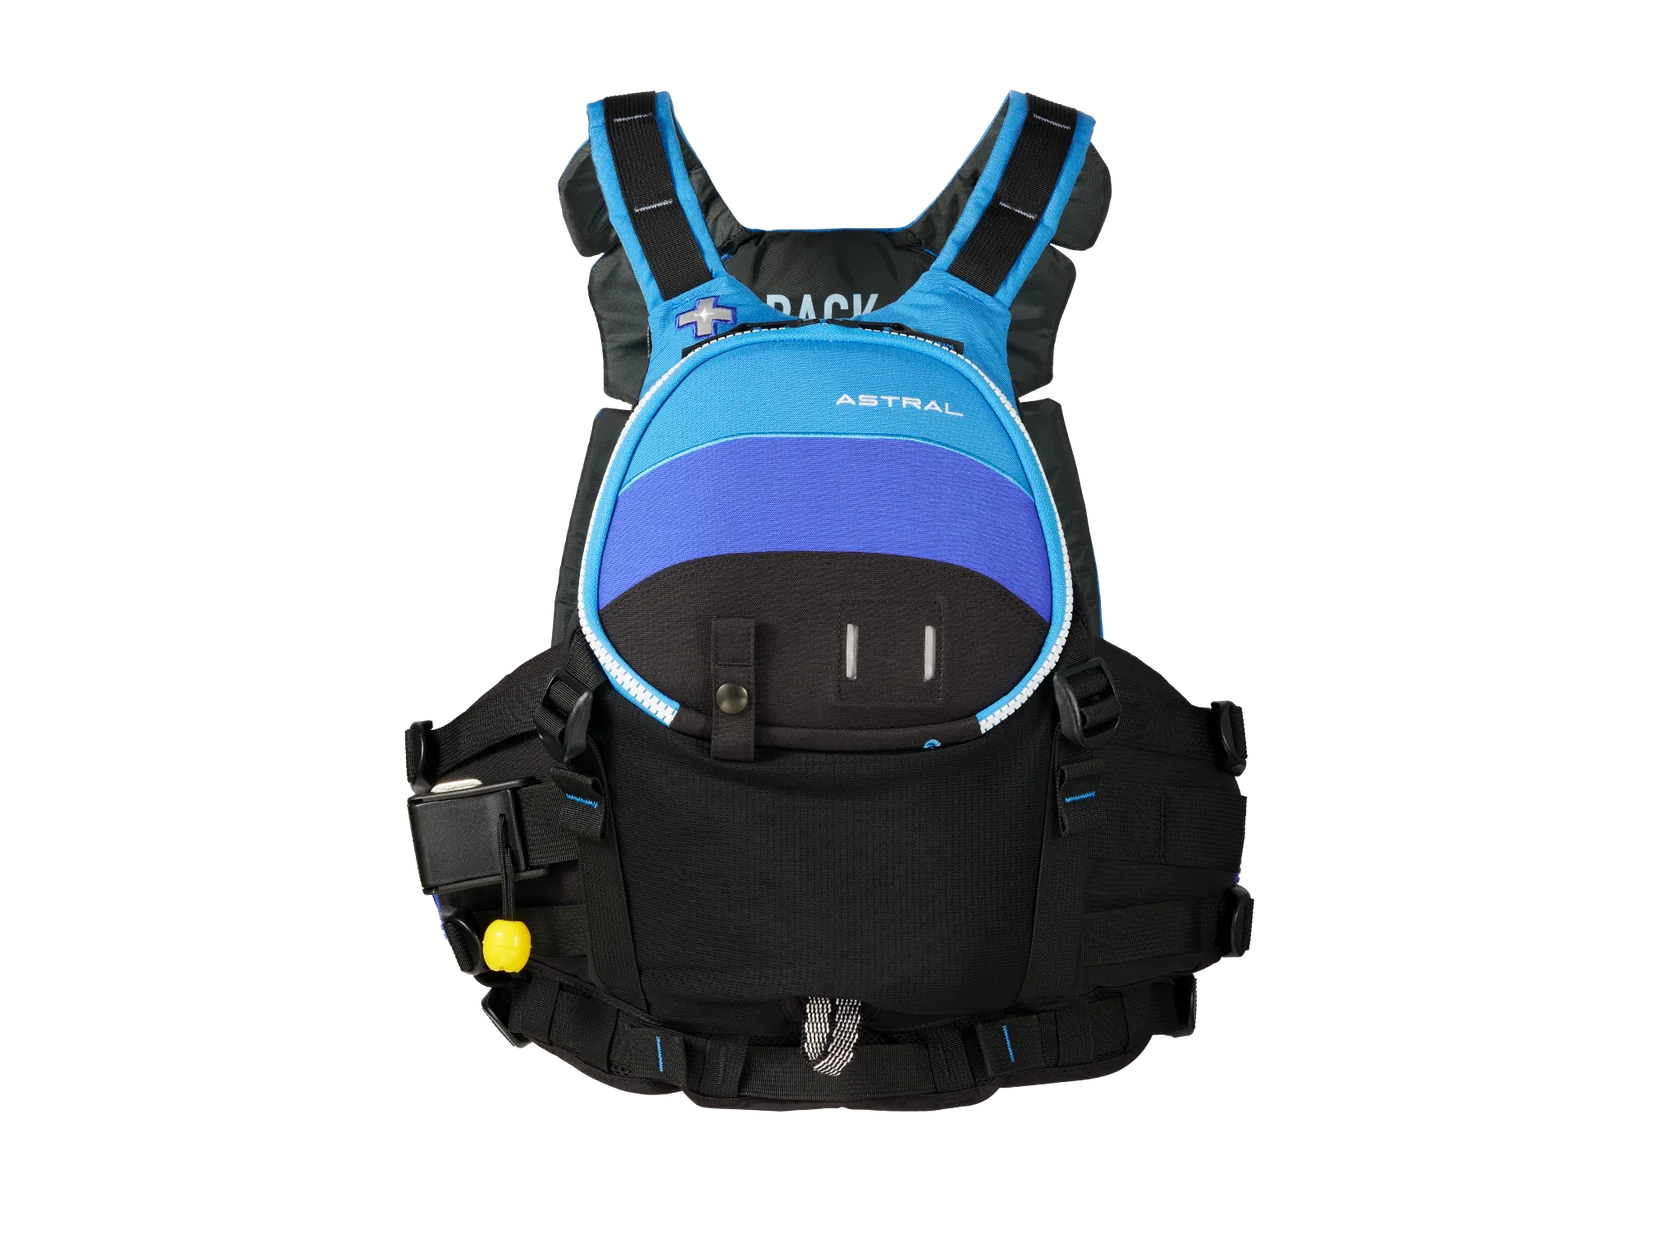 a blue and black Greenjacket Rescue PFD by Astral.